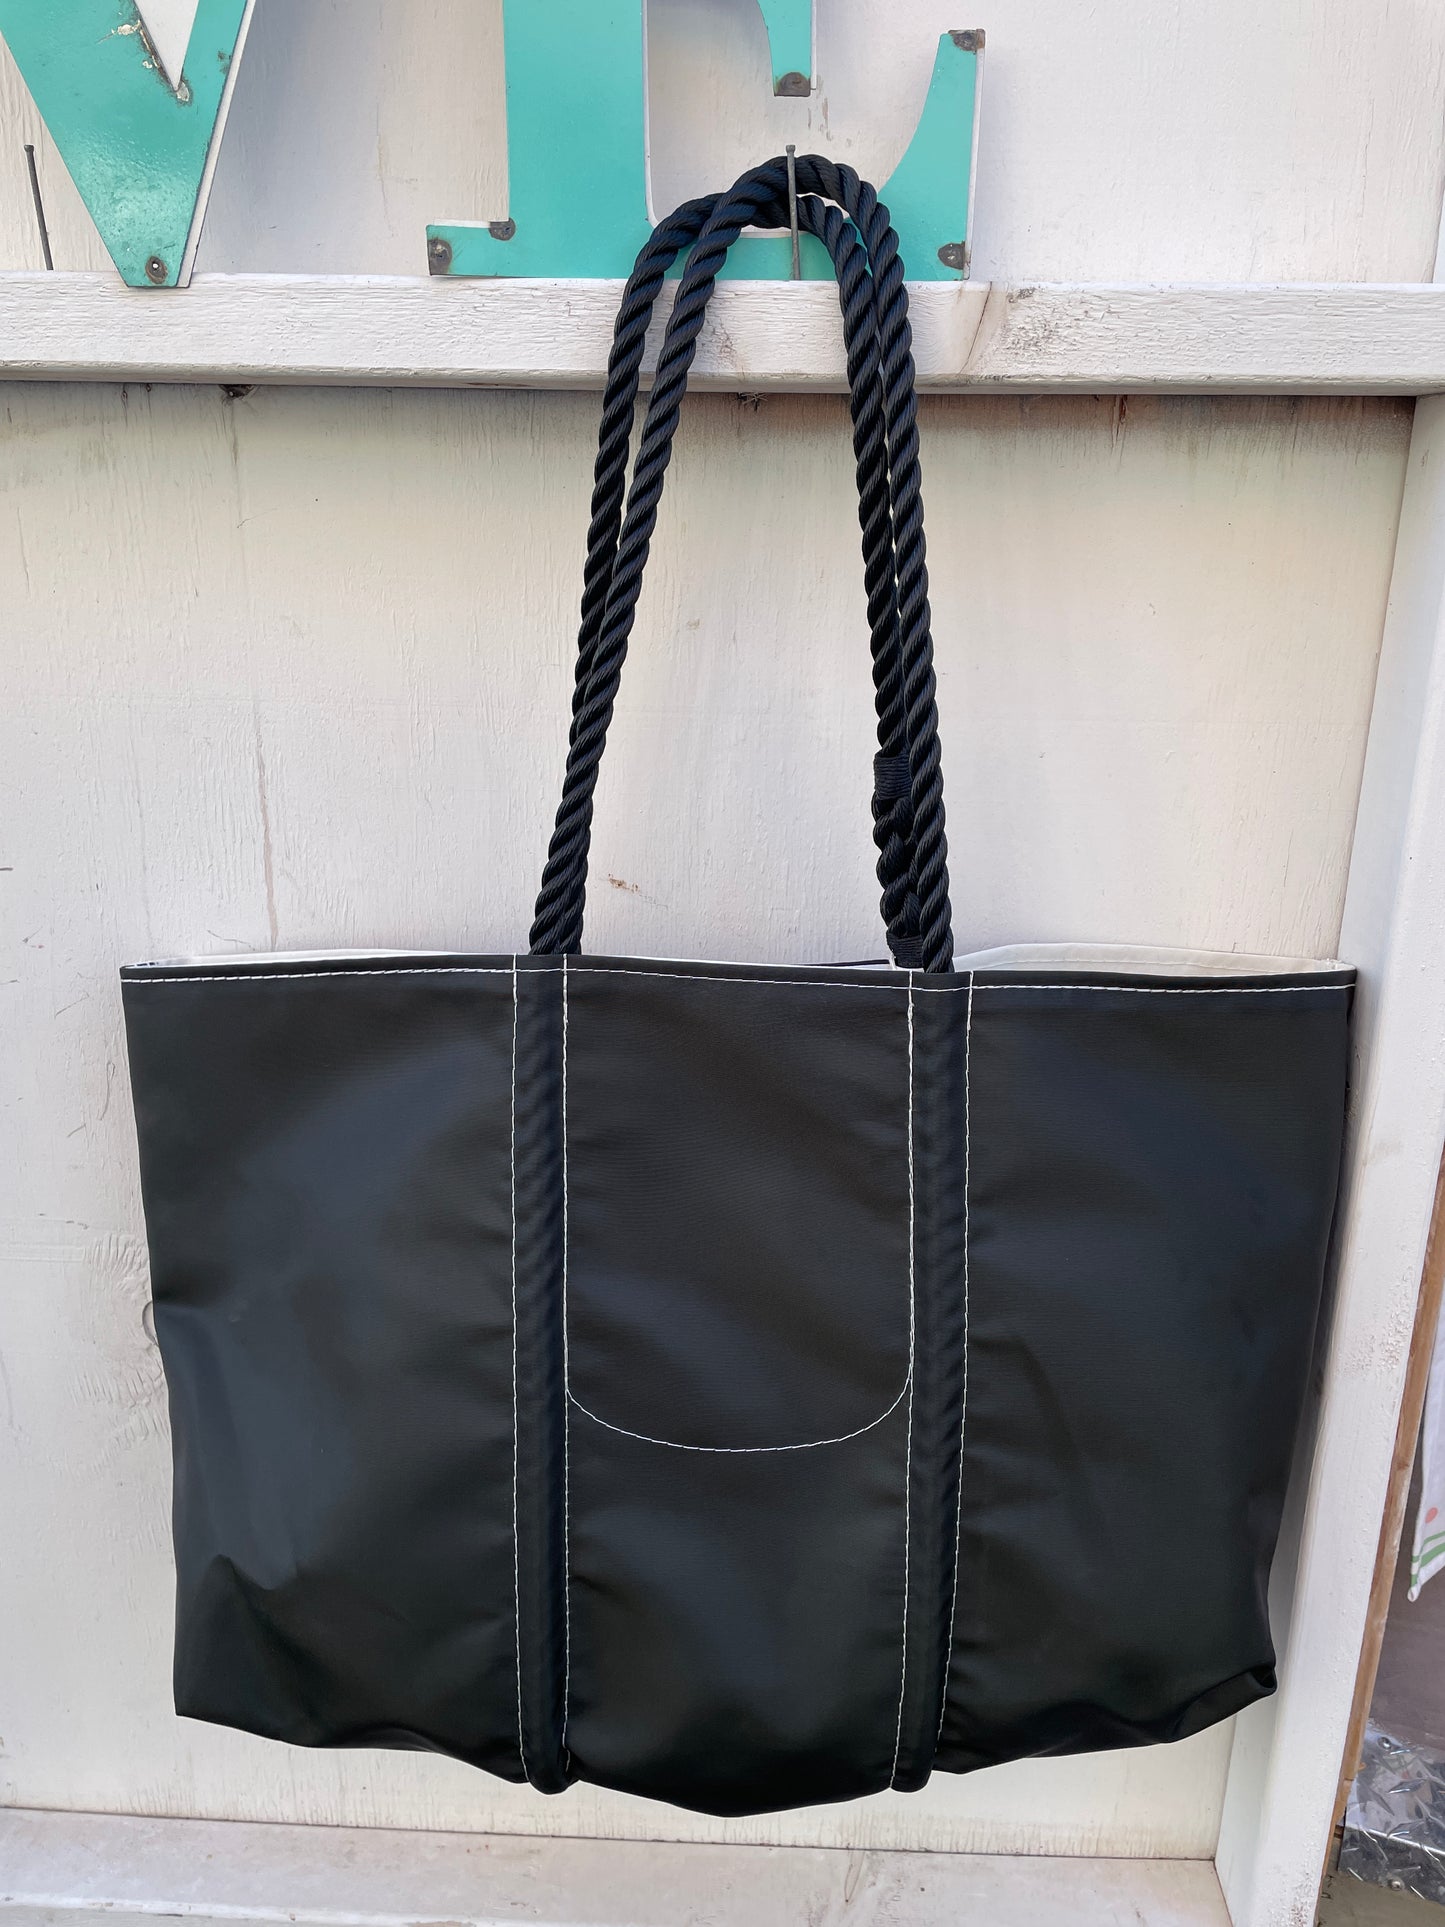 Sea Bags Maine Jolly Roger Large Tote